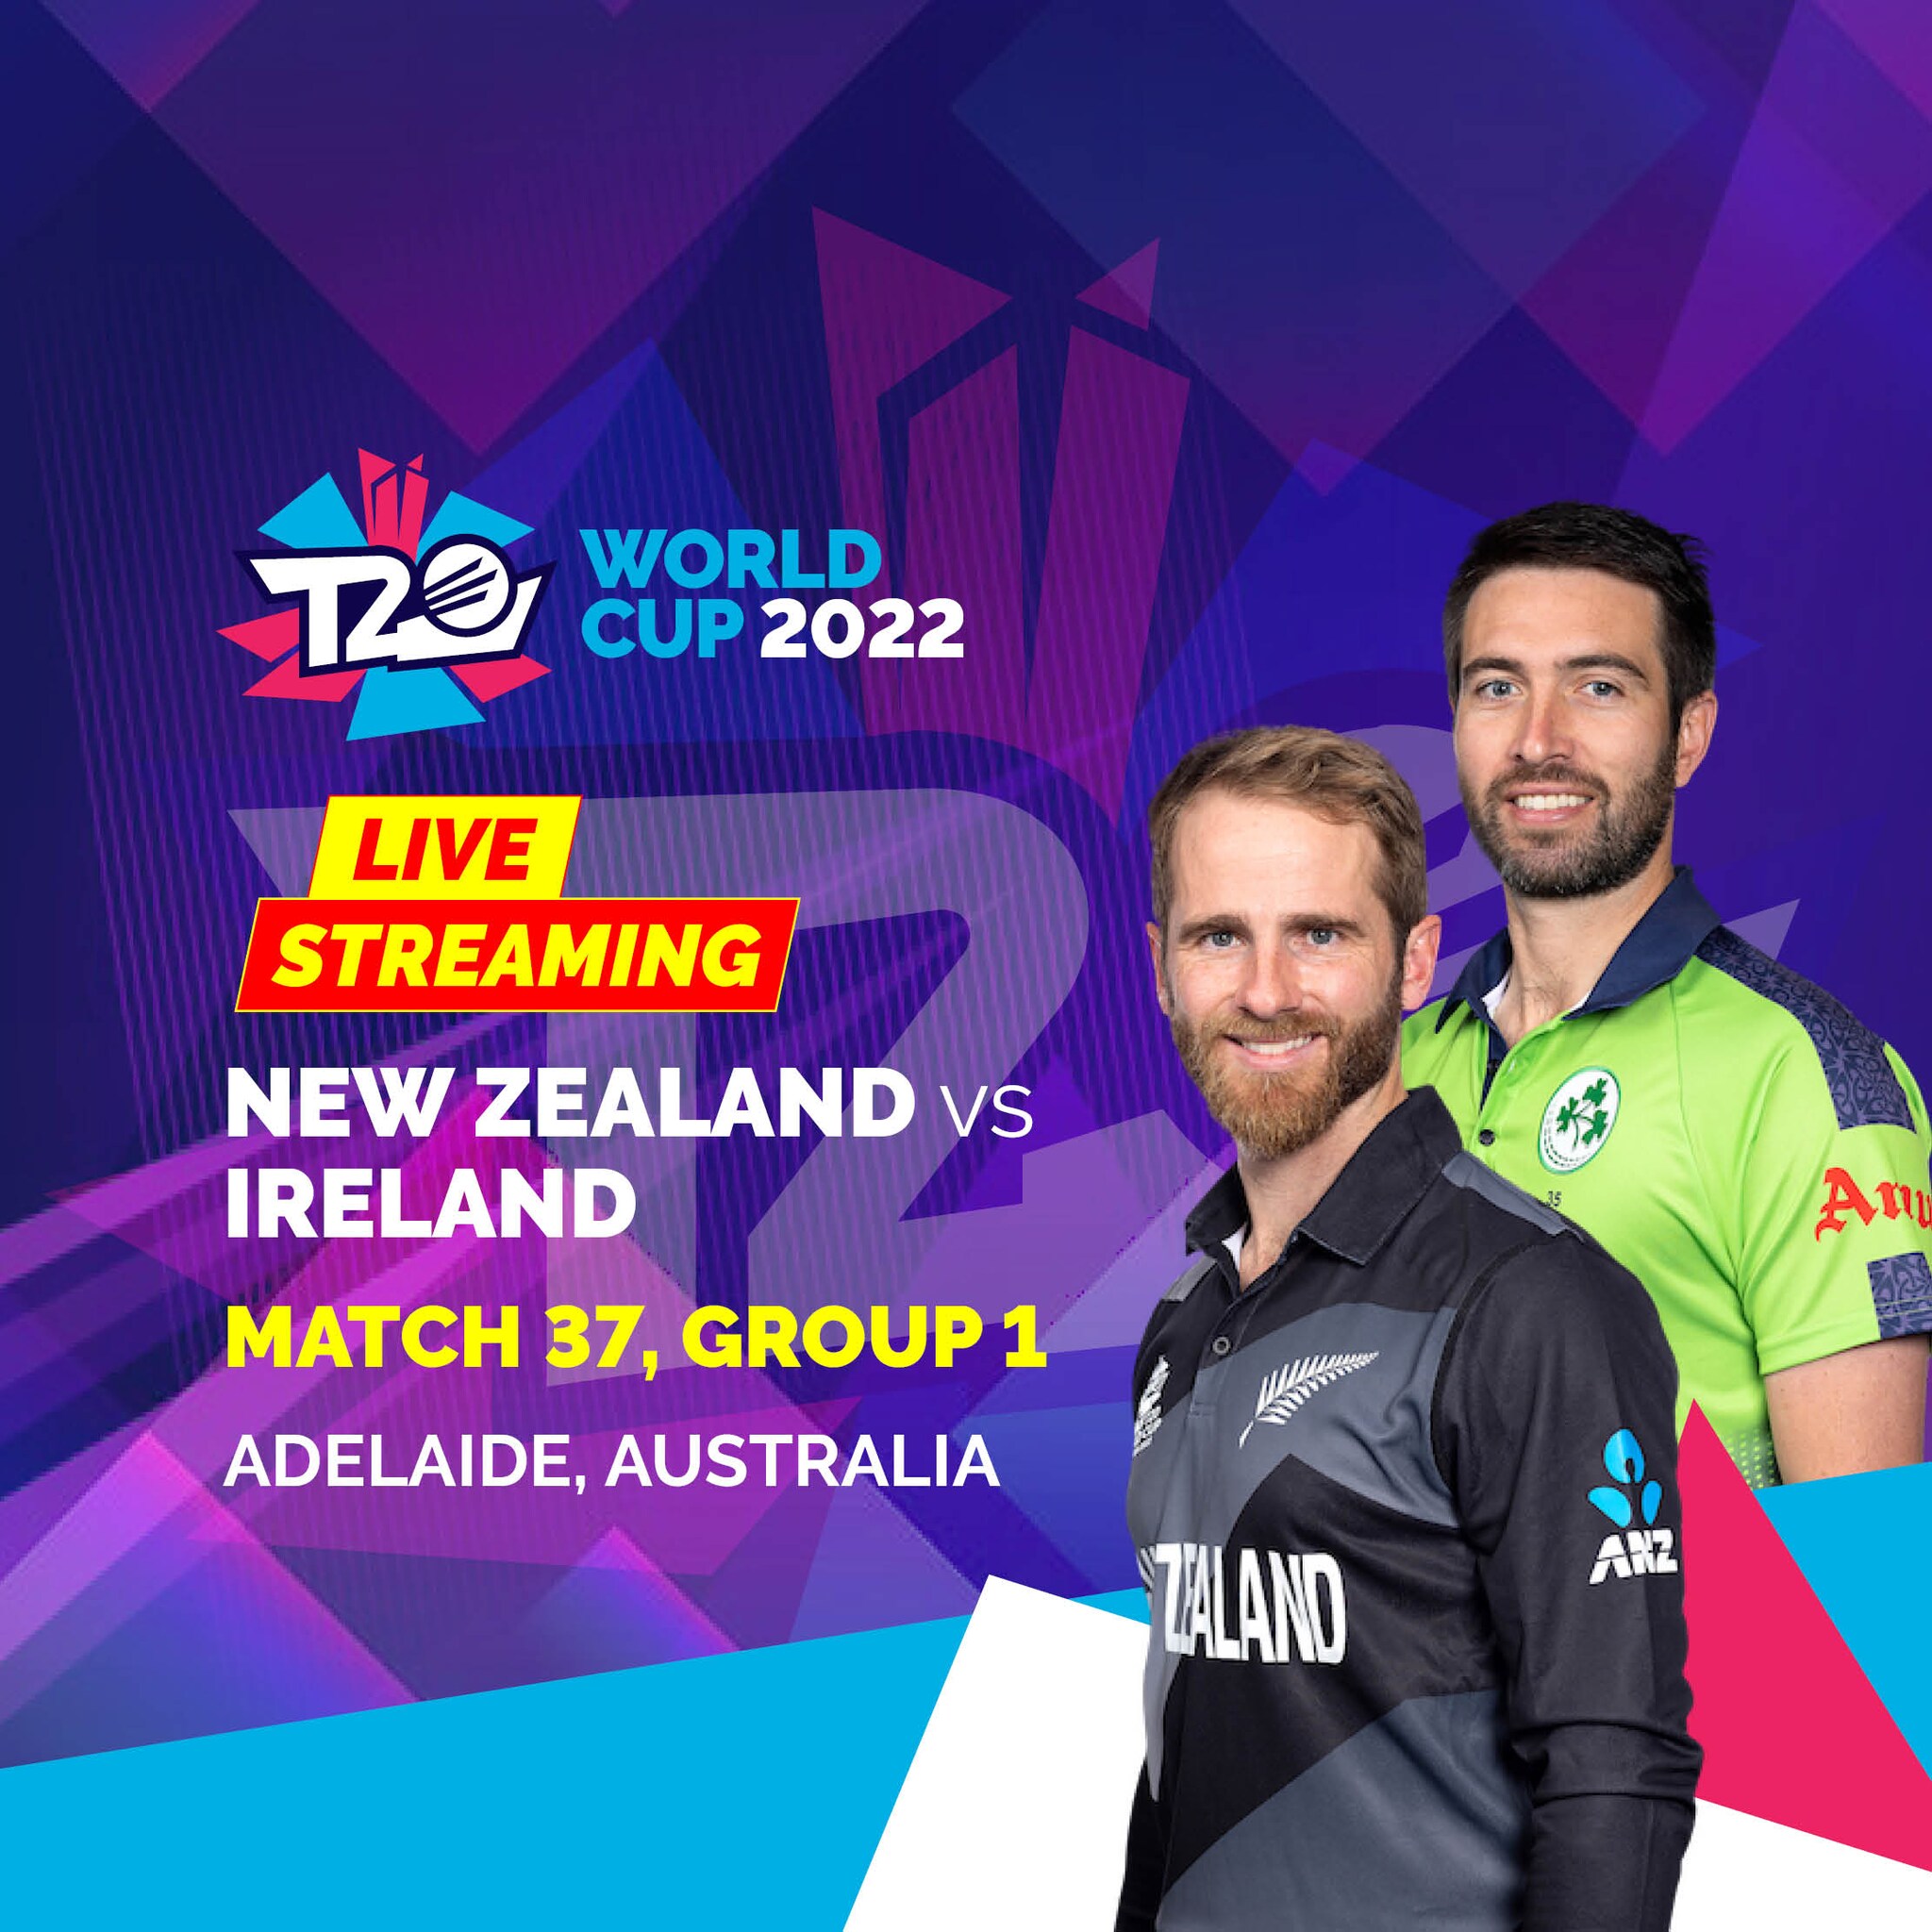 New Zealand vs Ireland Live Cricket Streaming How to Watch T20 World Cup 2022 Coverage on TV And Online